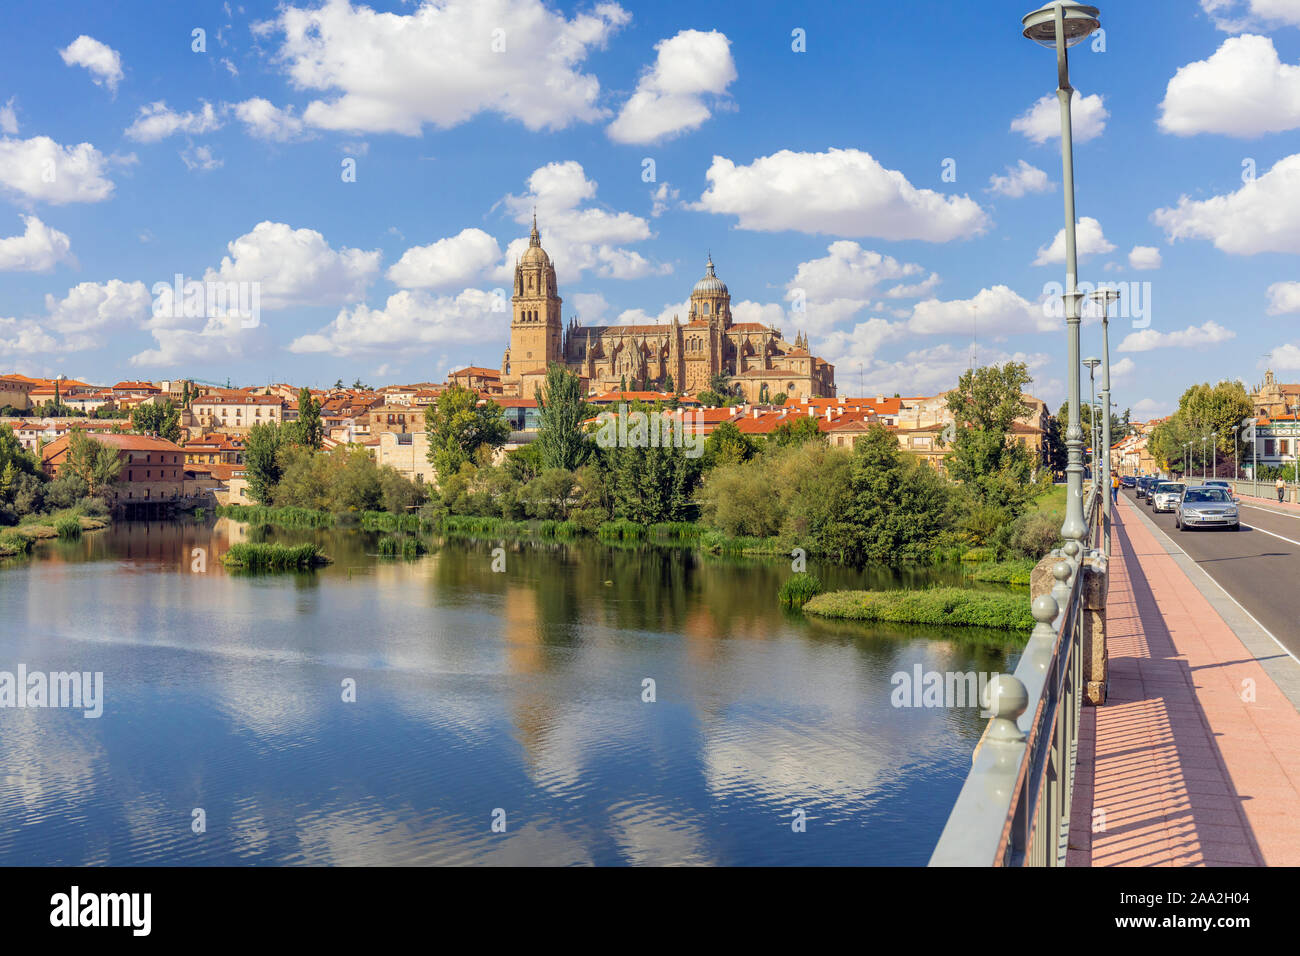 The  late Gothic and Baroque Catedral Nueva, or New Cathedral, seen over the river Tormes, Salamanca, Salamanca Province, Castile and Leon, Spain.  Th Stock Photo